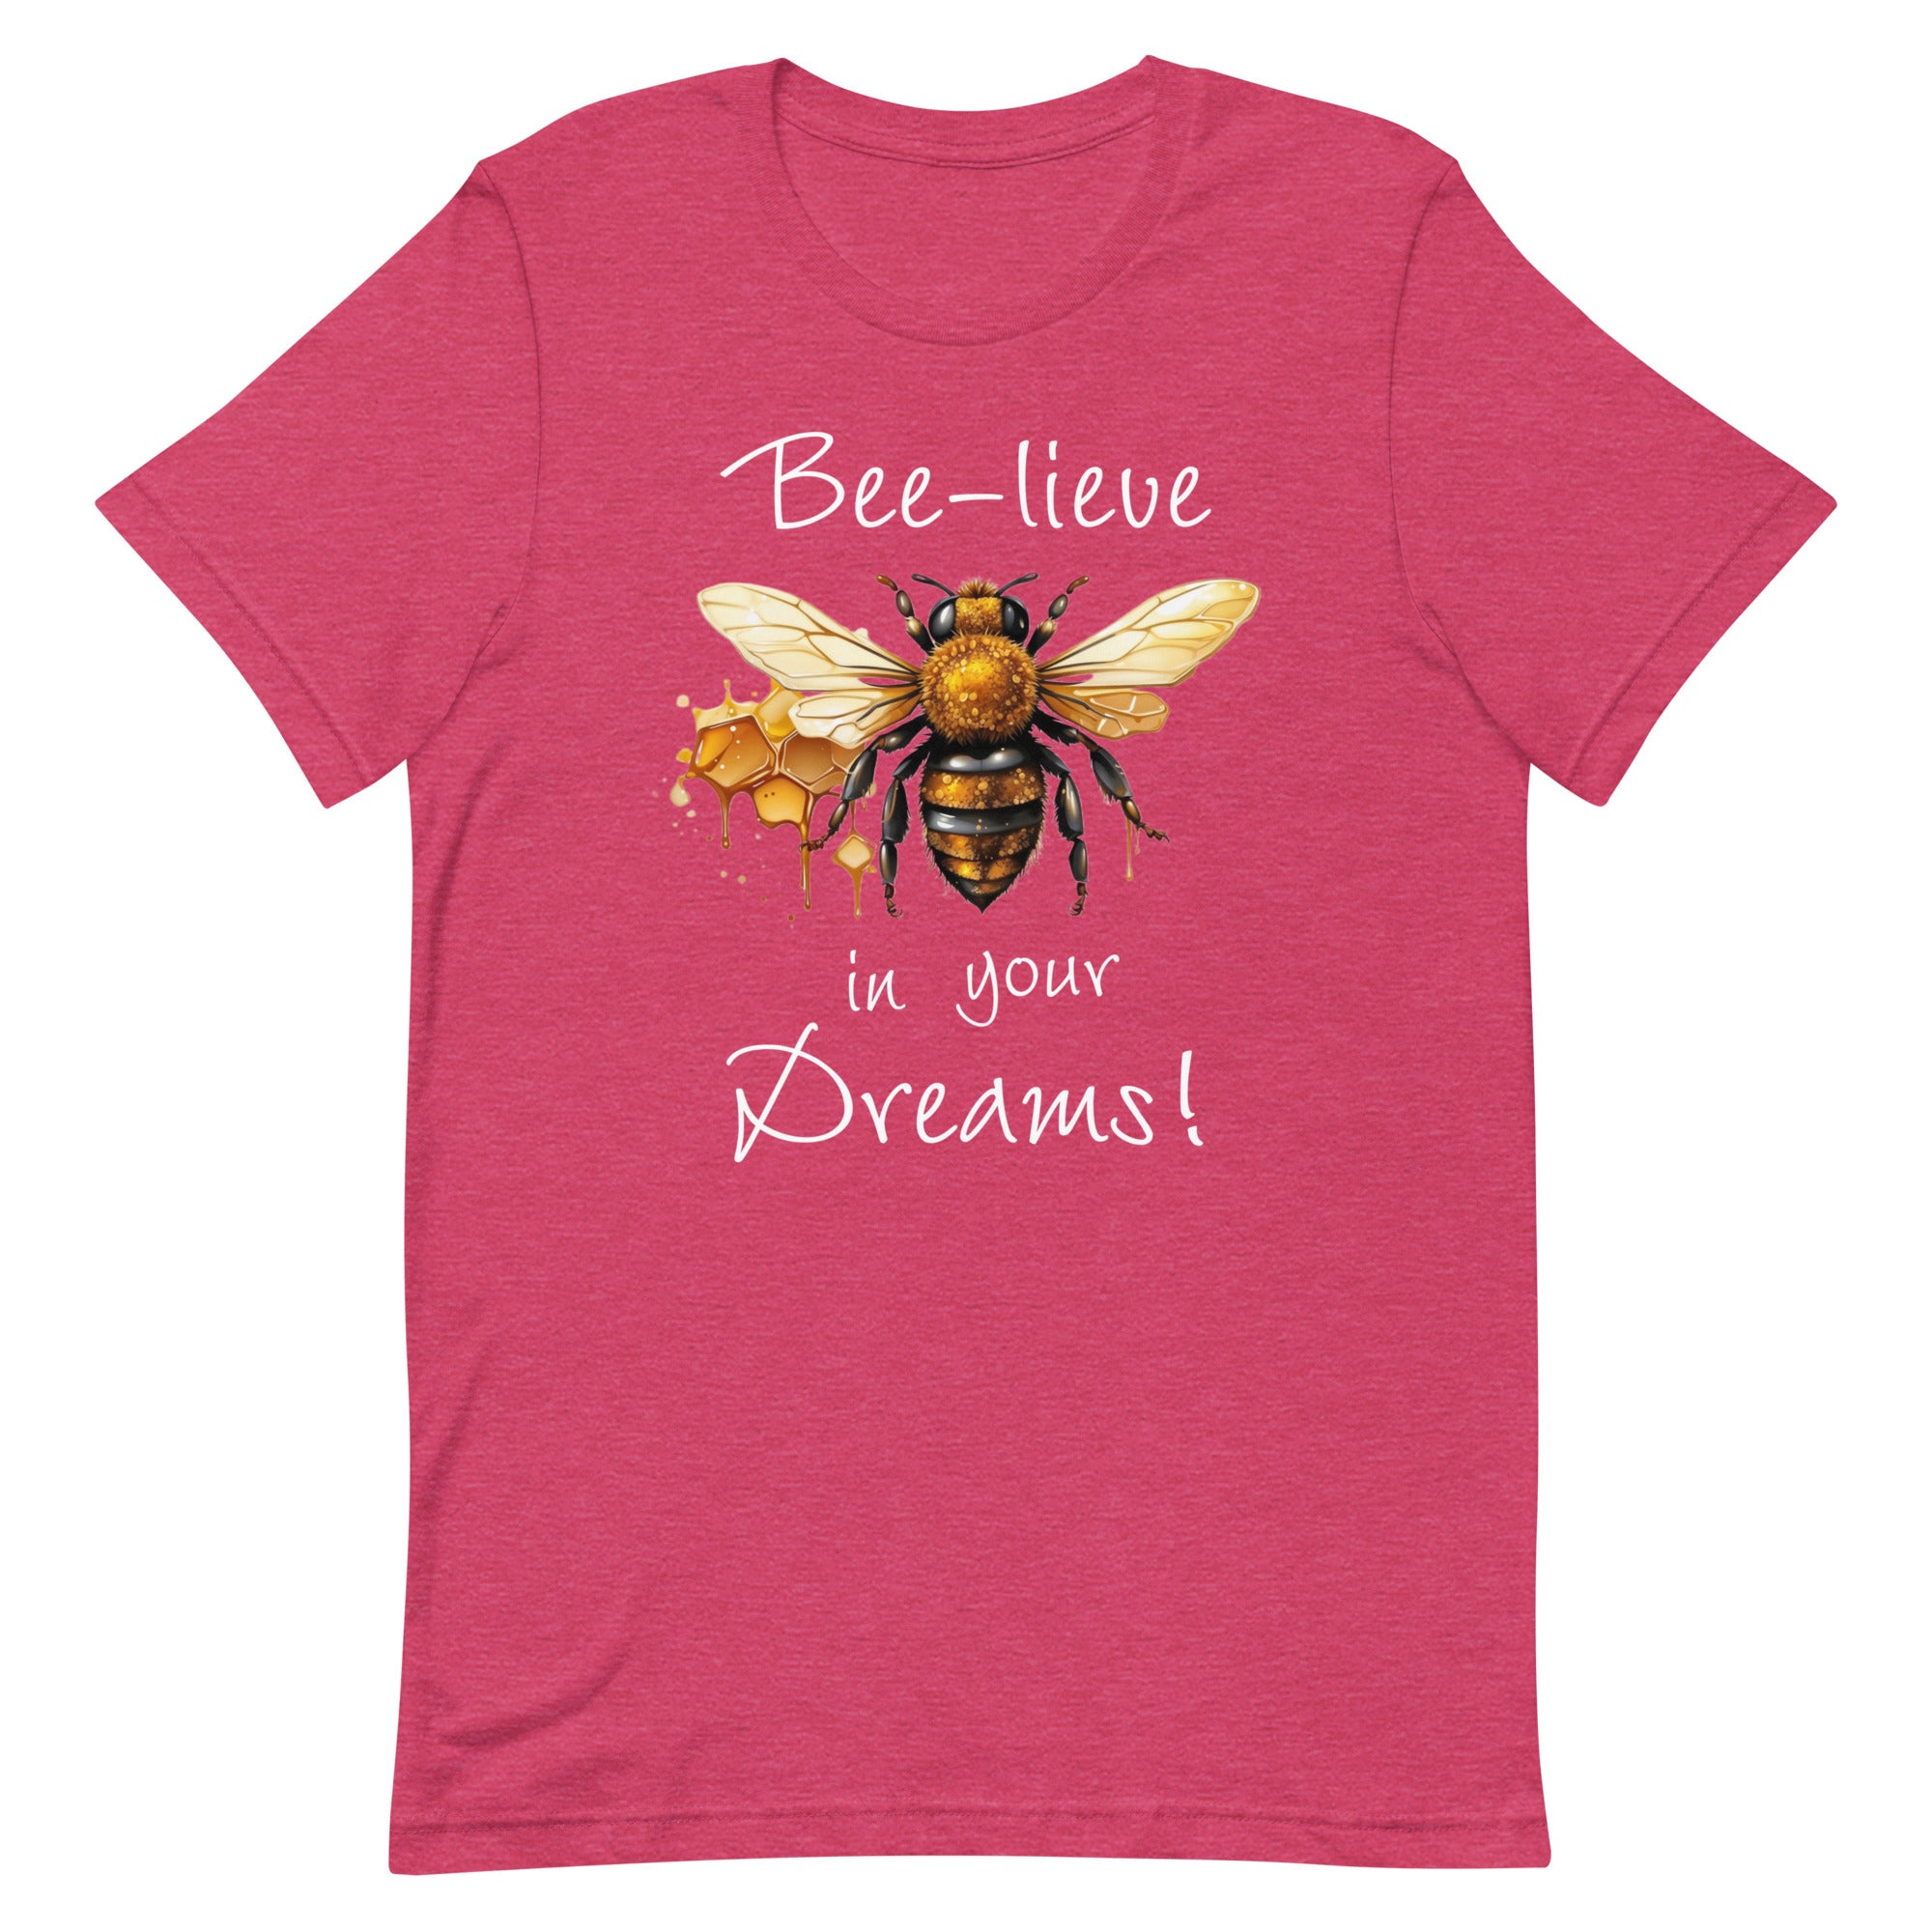 Bee-lieve in Your Dreams T-Shirt, Gift for Bee Lovers Heather Raspberry S M L XL DenBox